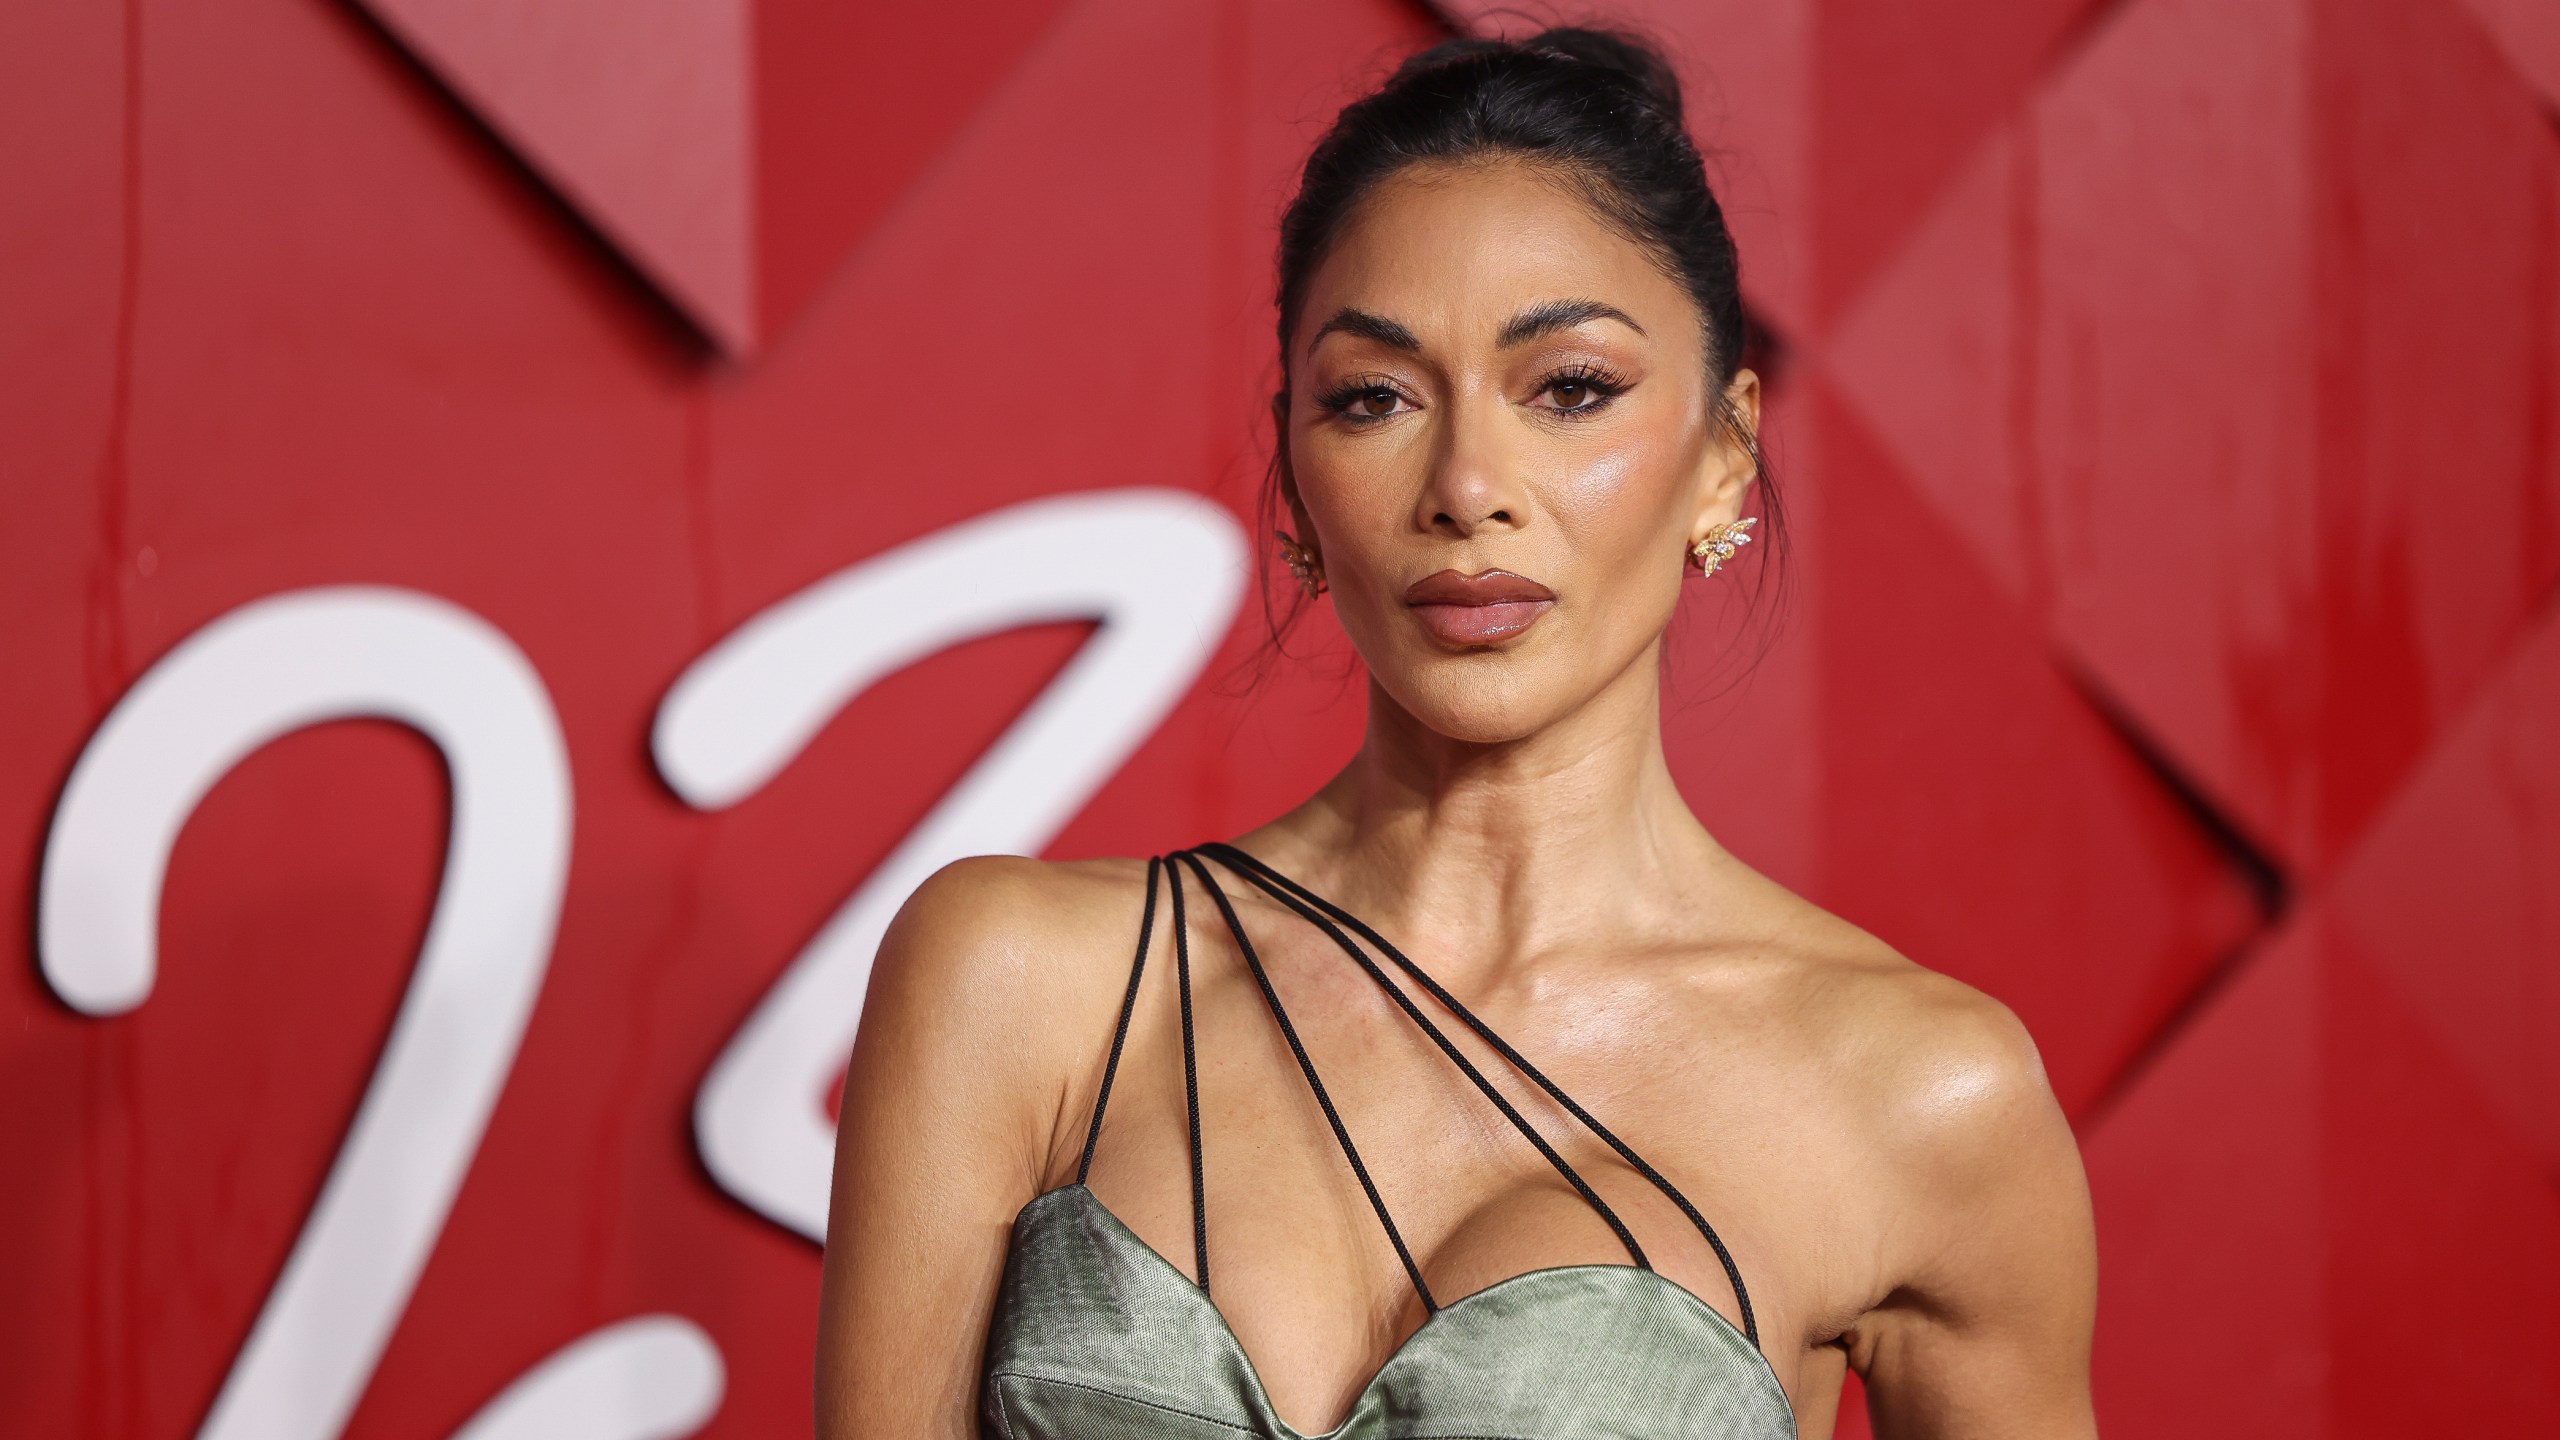 FILE - Nicole Scherzinger poses for photographers upon arrival at the British Fashion Awards, Dec. 4, 2023 in London. An acclaimed revival of Andrew Lloyd Webber’s “Sunset Boulevard” and a play about the travails of England’s national soccer team lead the race for the Olivier Awards recognizing work on the London stage. The 11 nominations for “Sunset Boulevard” include best actress in a musical for Nicole Scherzinger. Winners will be announced April 14 in a ceremony at London’s Royal Albert Hall. (Vianney Le Caer/Invision/AP, File)